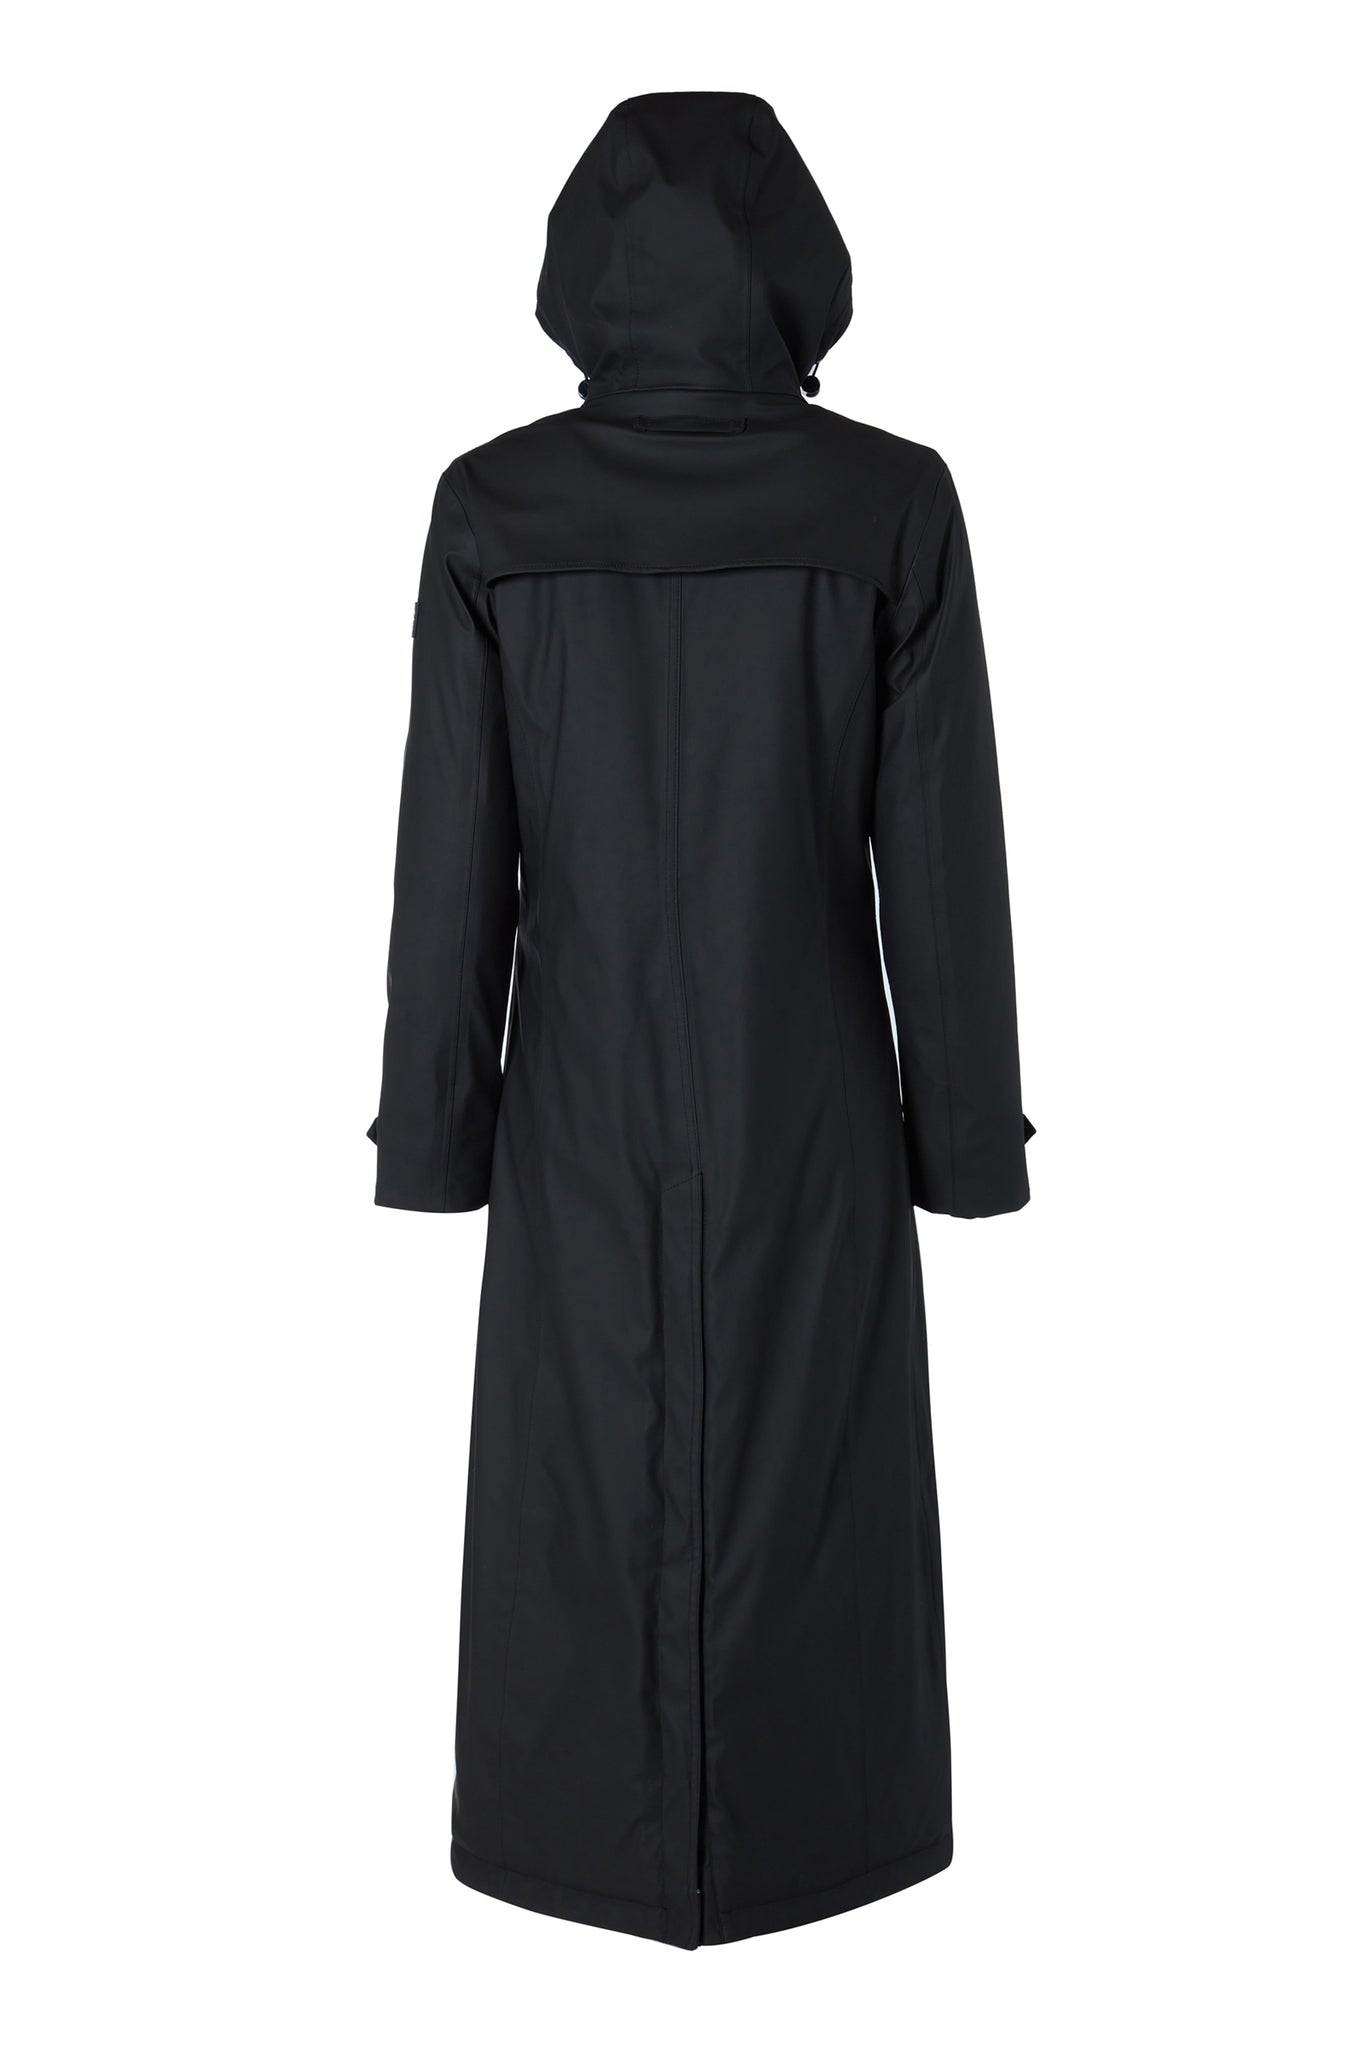 back of womens hooded longline black cot with internal gilet